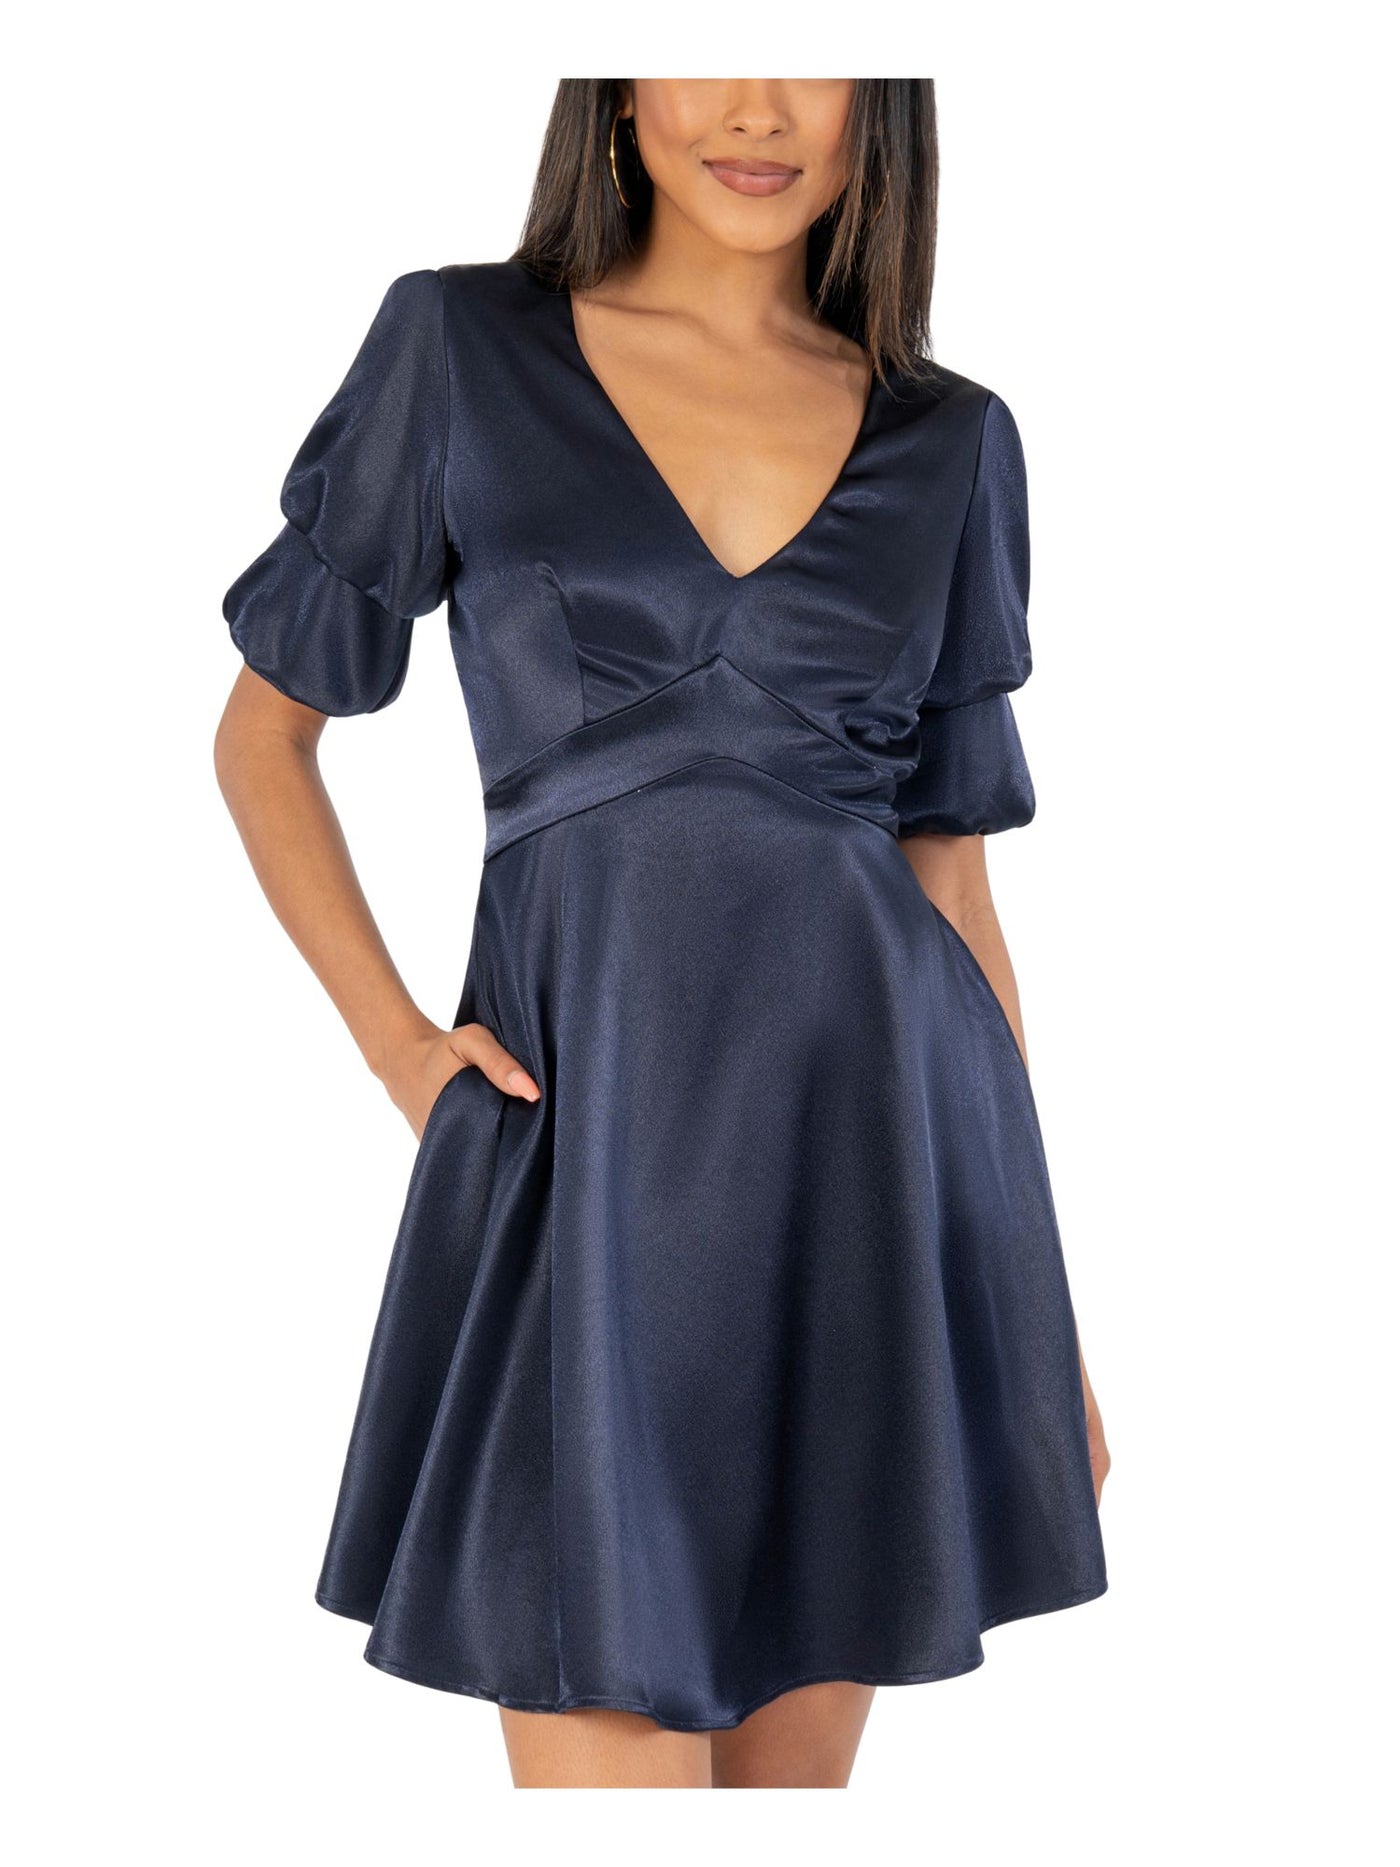 SPEECHLESS Womens Navy Pocketed Darted Satin Short Sleeve V Neck Short Party Fit + Flare Dress Juniors 5